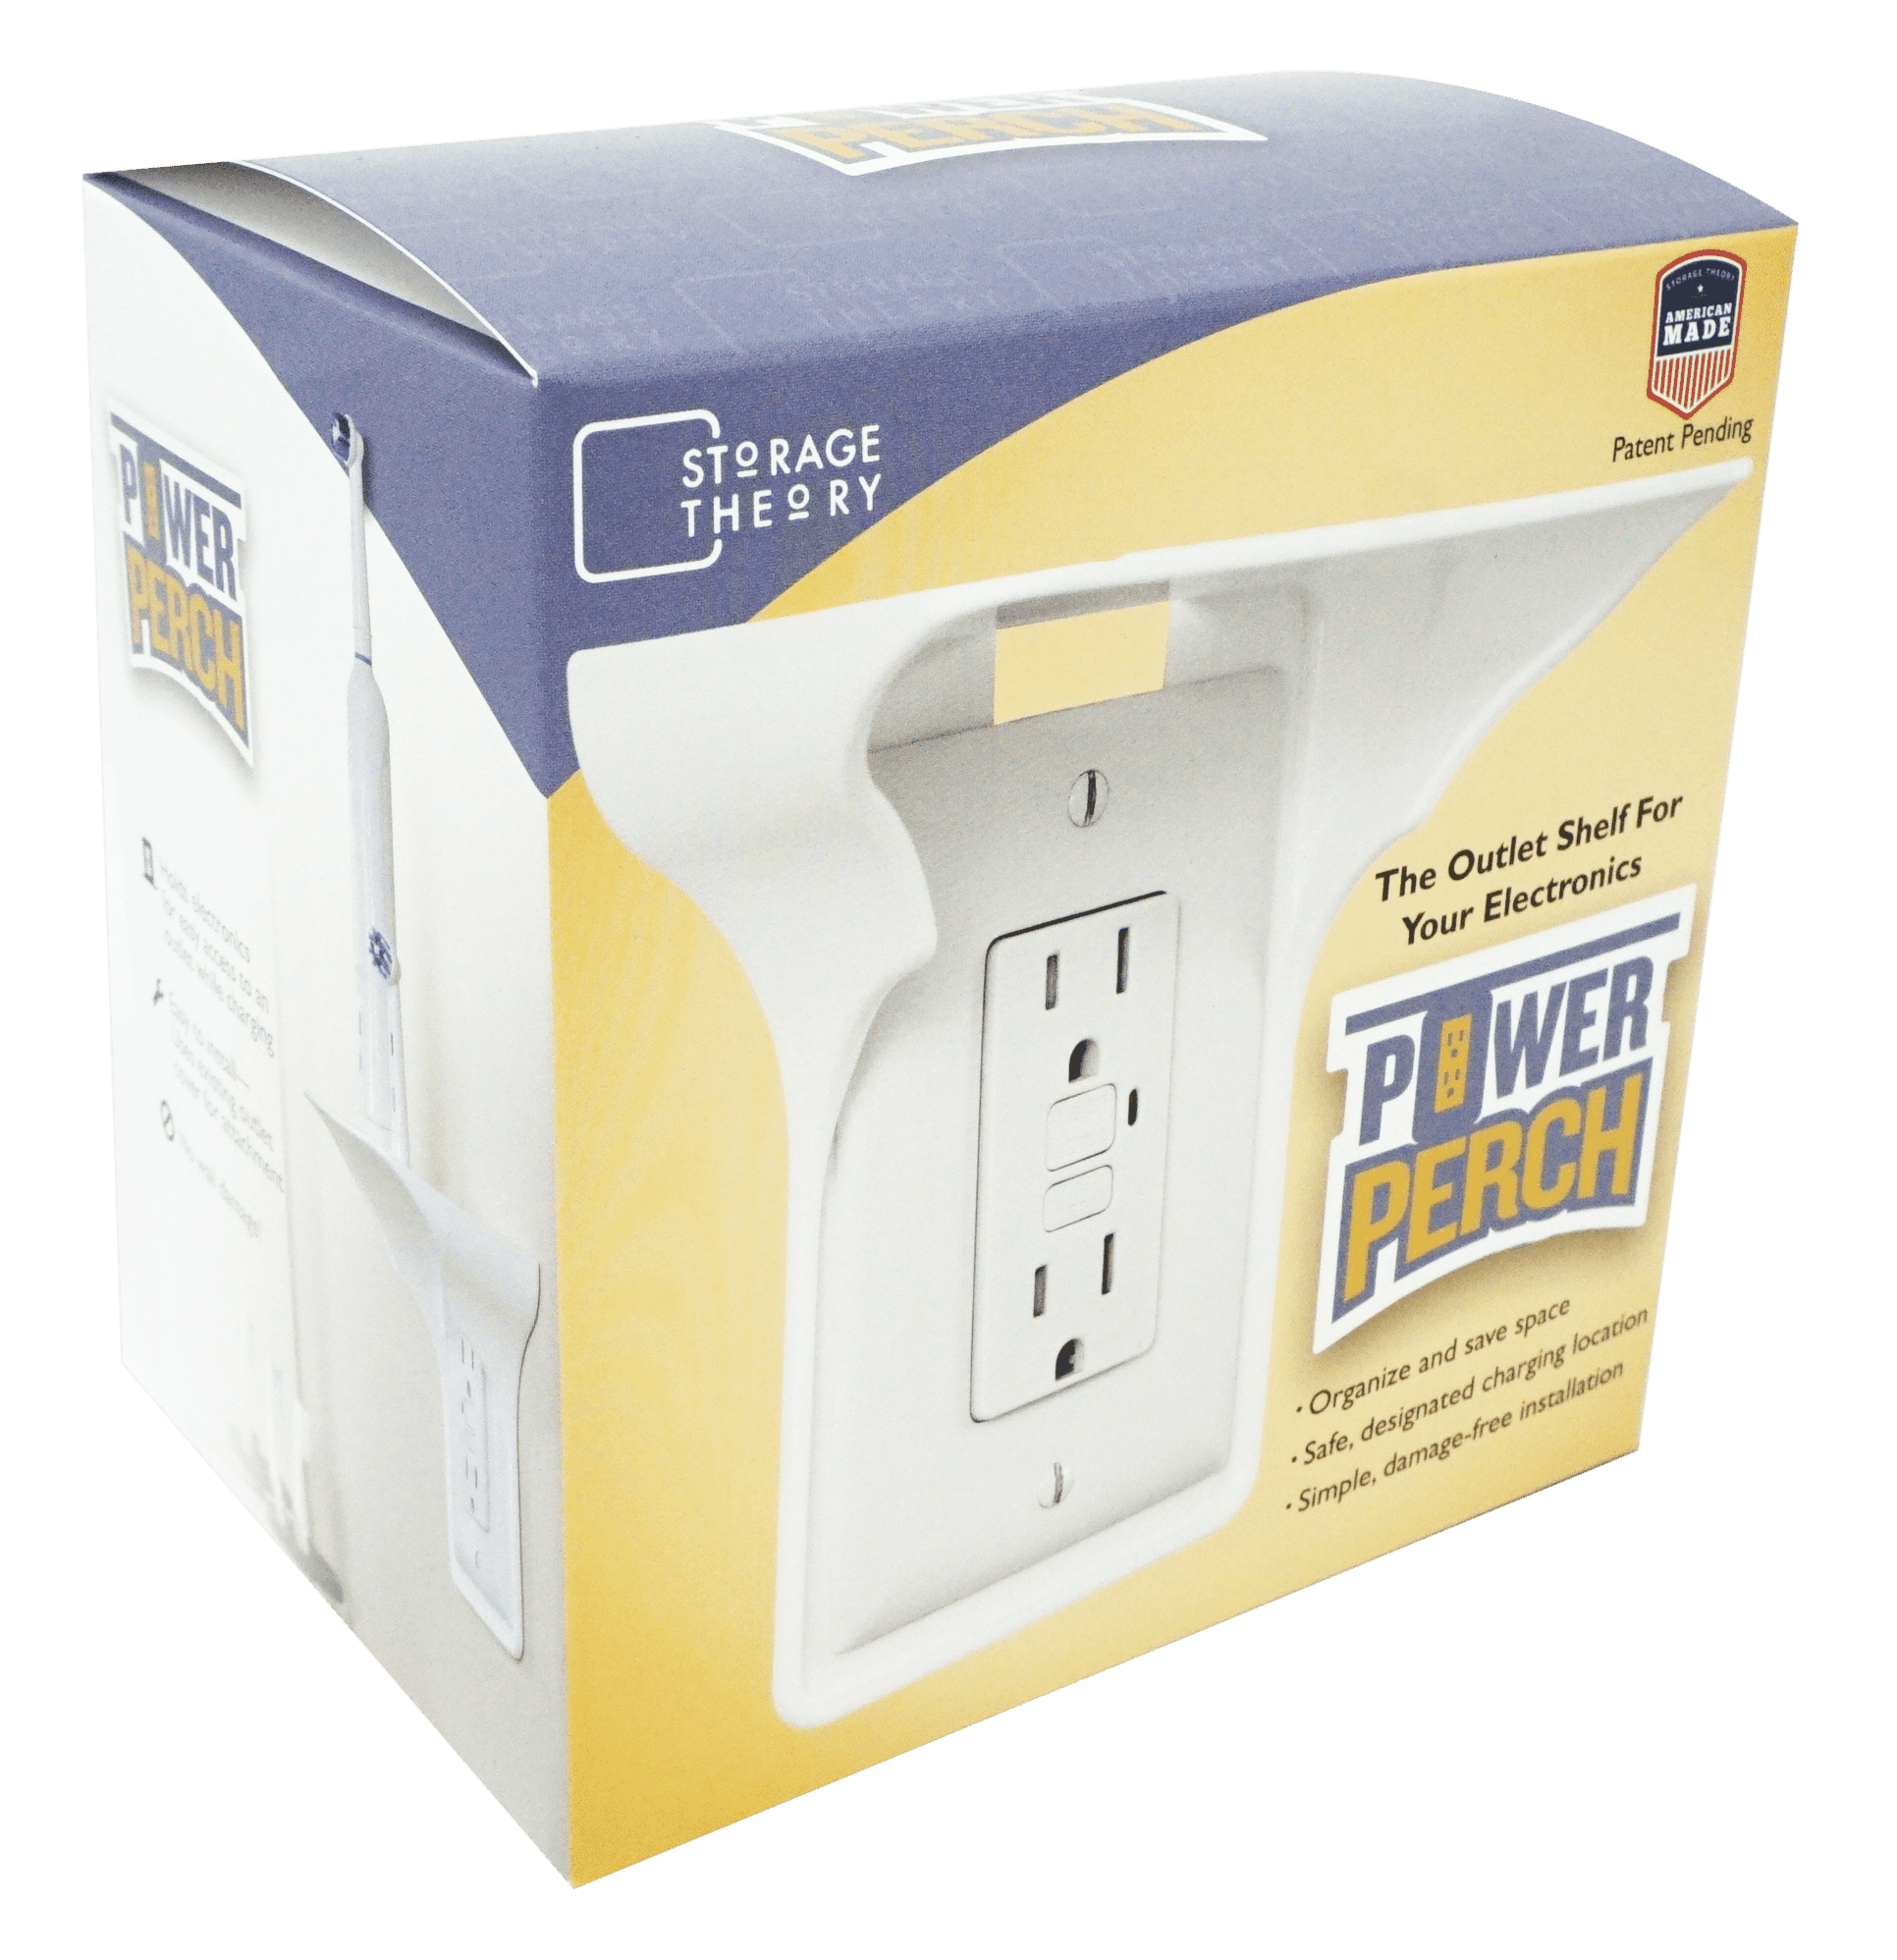 Easy Installation Wall Outlet Shelf USA Shipping 